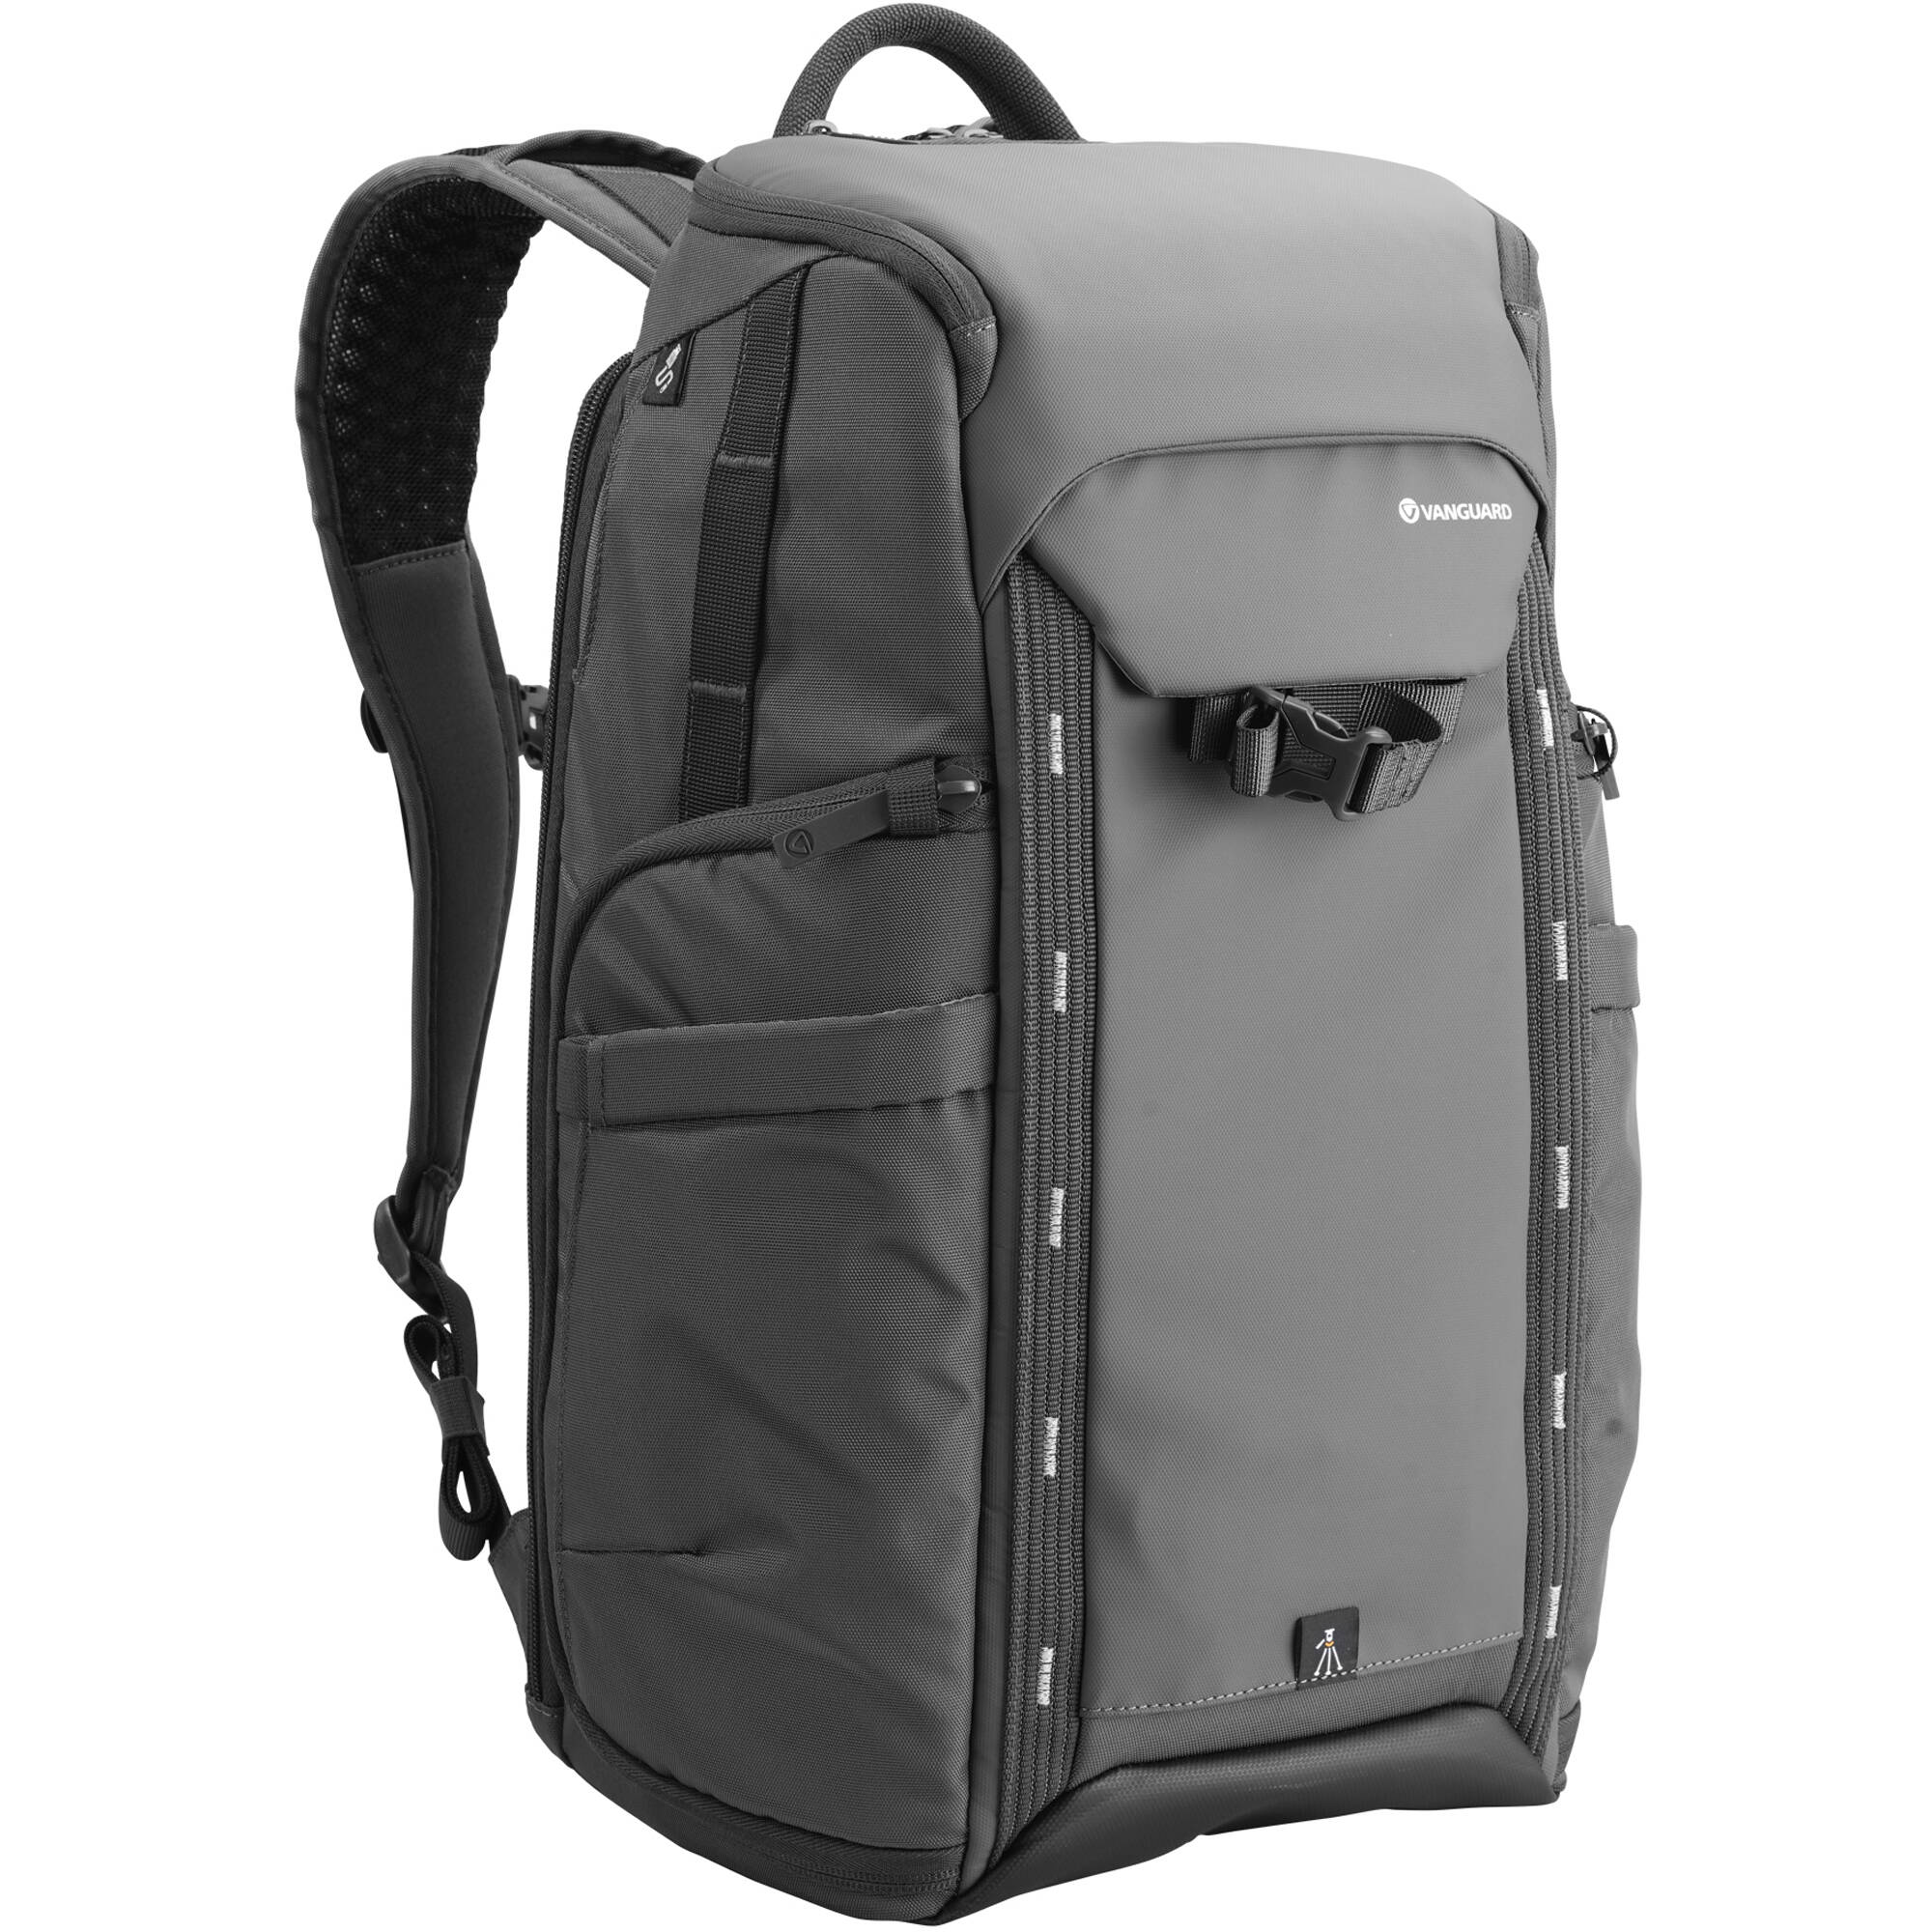 Vanguard VEO adaptor R48 GY backpack with USB port - rear access